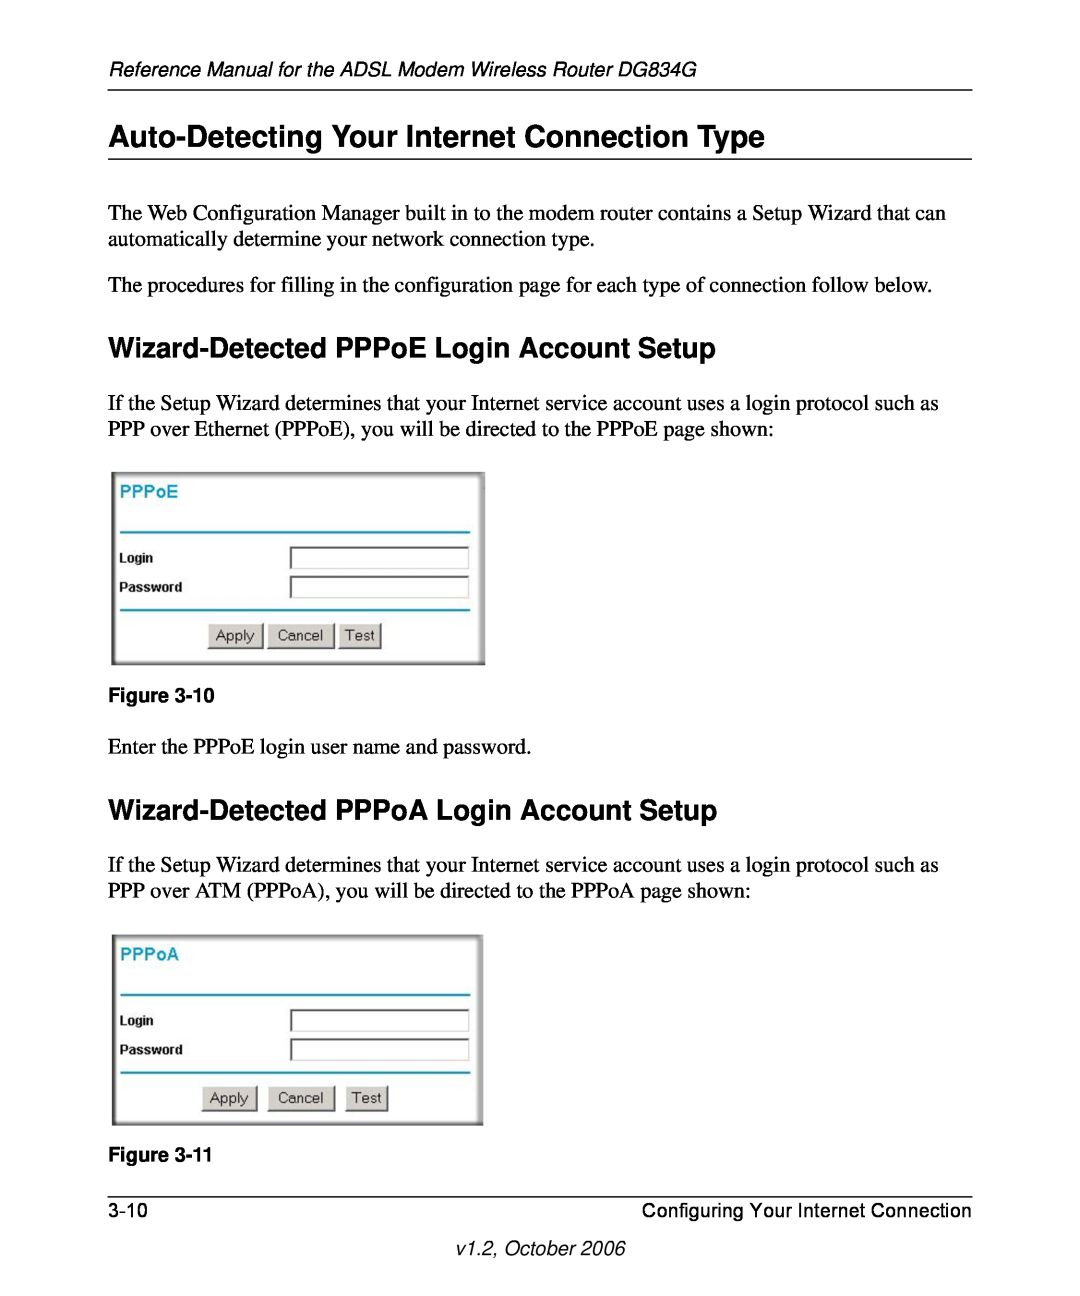 NETGEAR DG834G manual Auto-Detecting Your Internet Connection Type, Wizard-Detected PPPoE Login Account Setup 